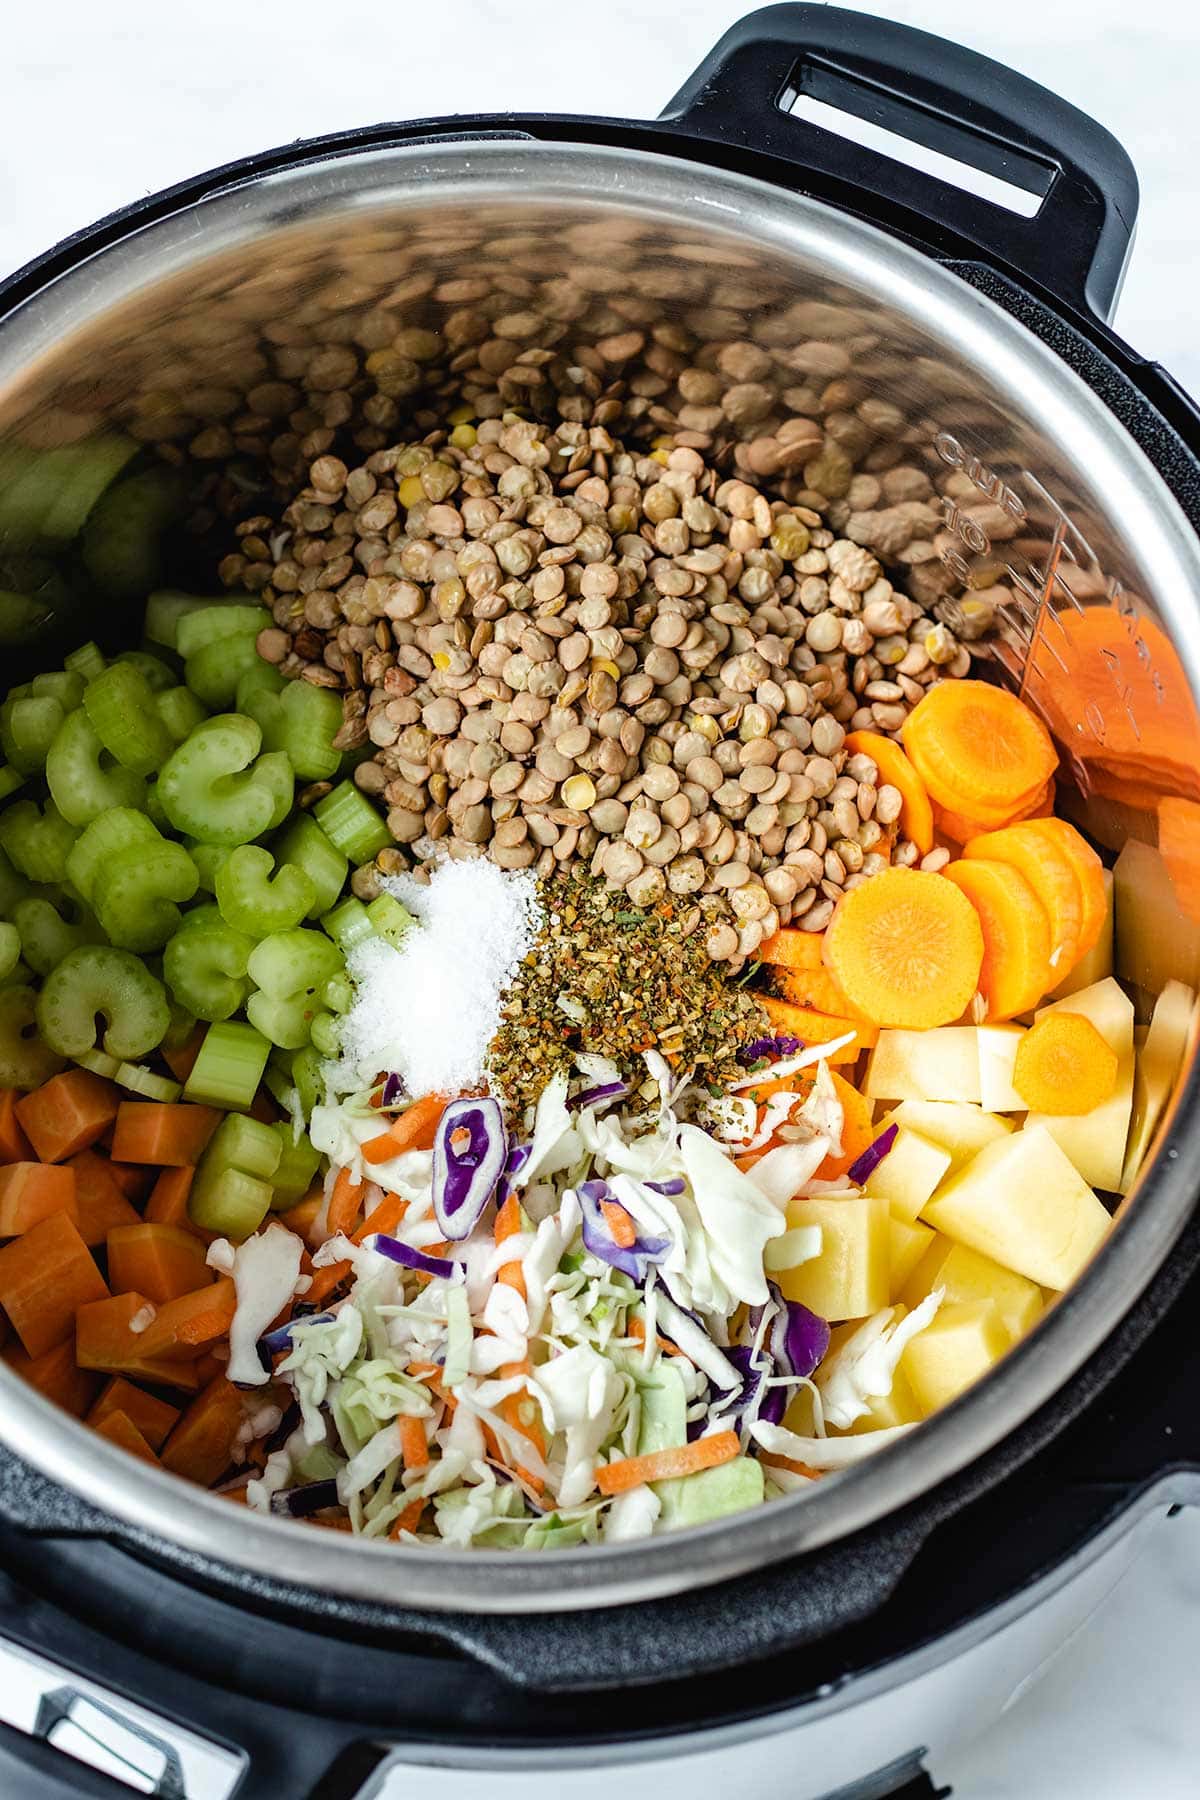 Lentils, carrots, potatoes, cabbage, sweet potato, celery and seasoning in an Instant Pot.